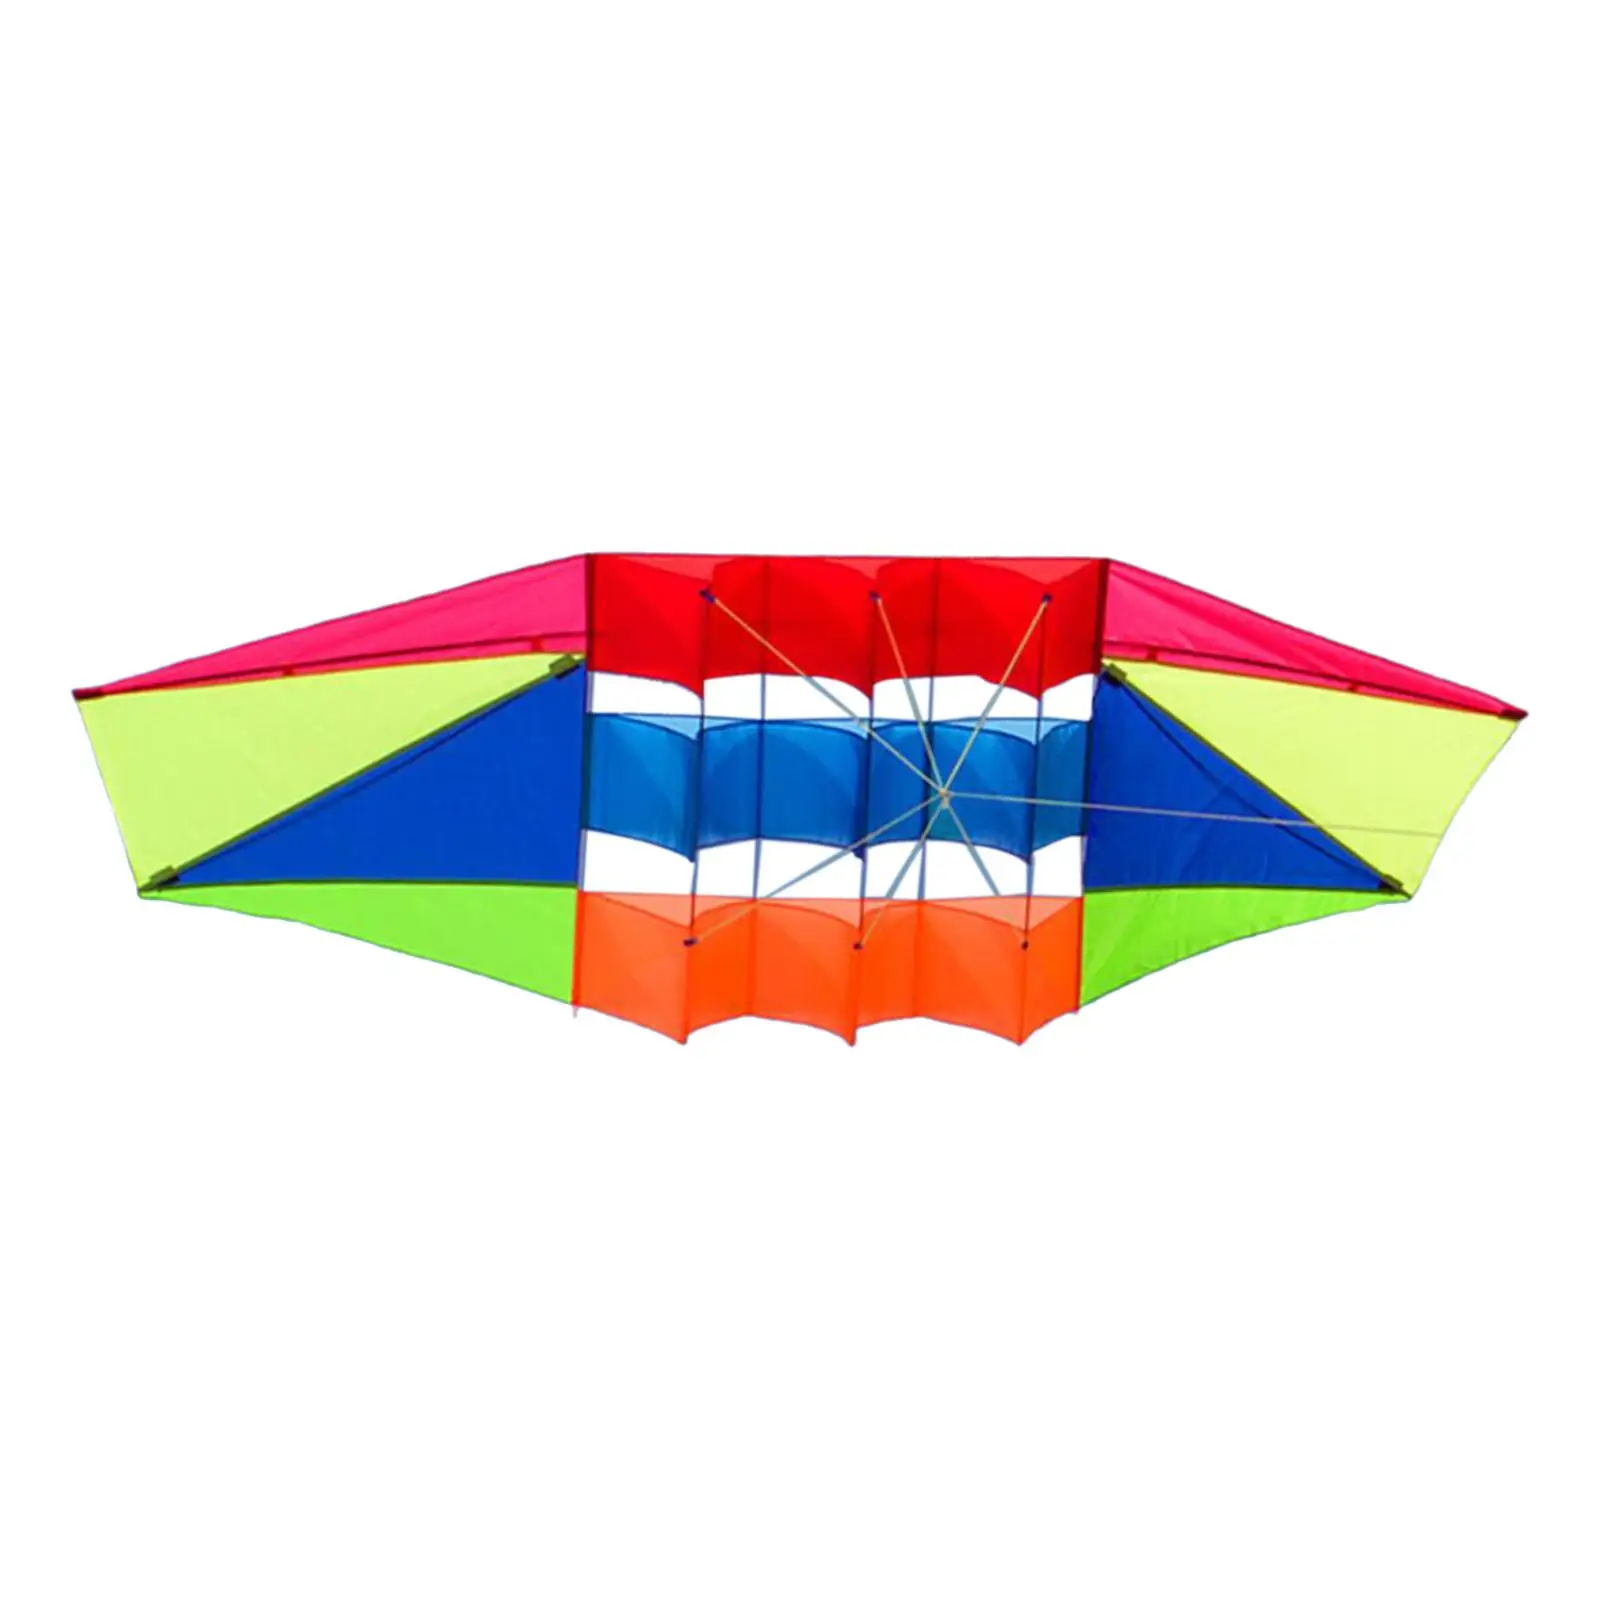 250Cmx80cm Surfing Beach s Outdoor Sport Toys Colorful  Toy Single Line s for Children Kids Adults Girls Boys